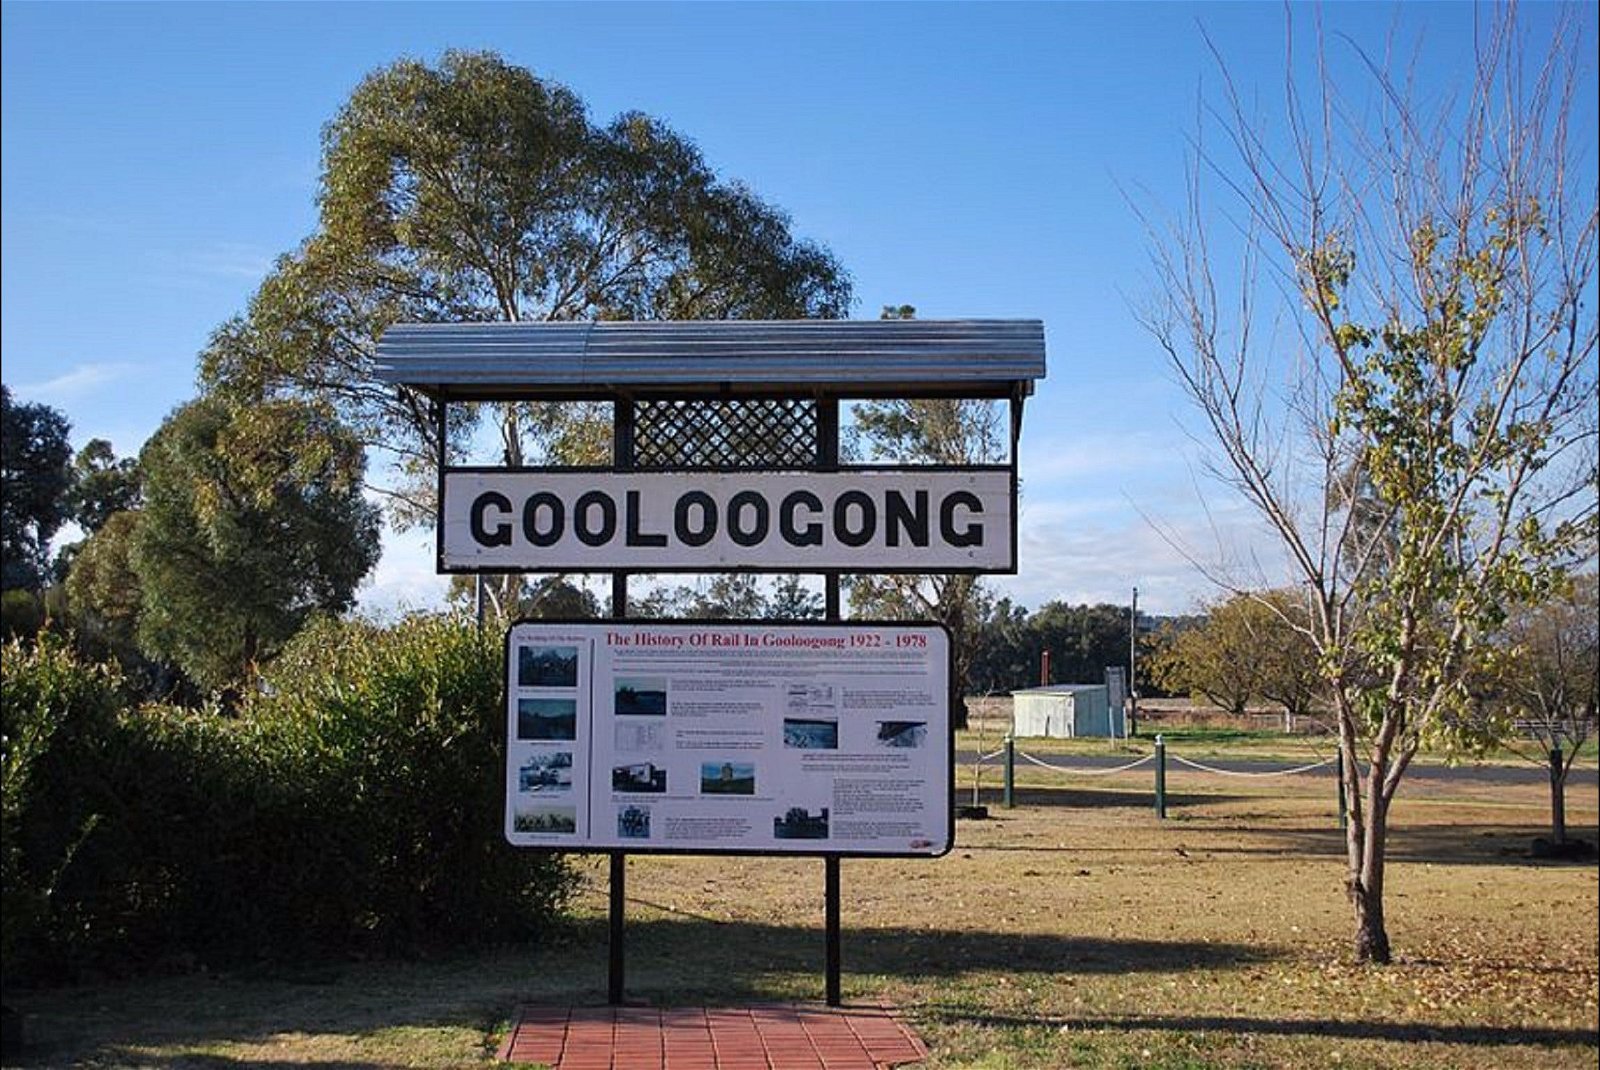 Gooloogong NSW Attractions Melbourne